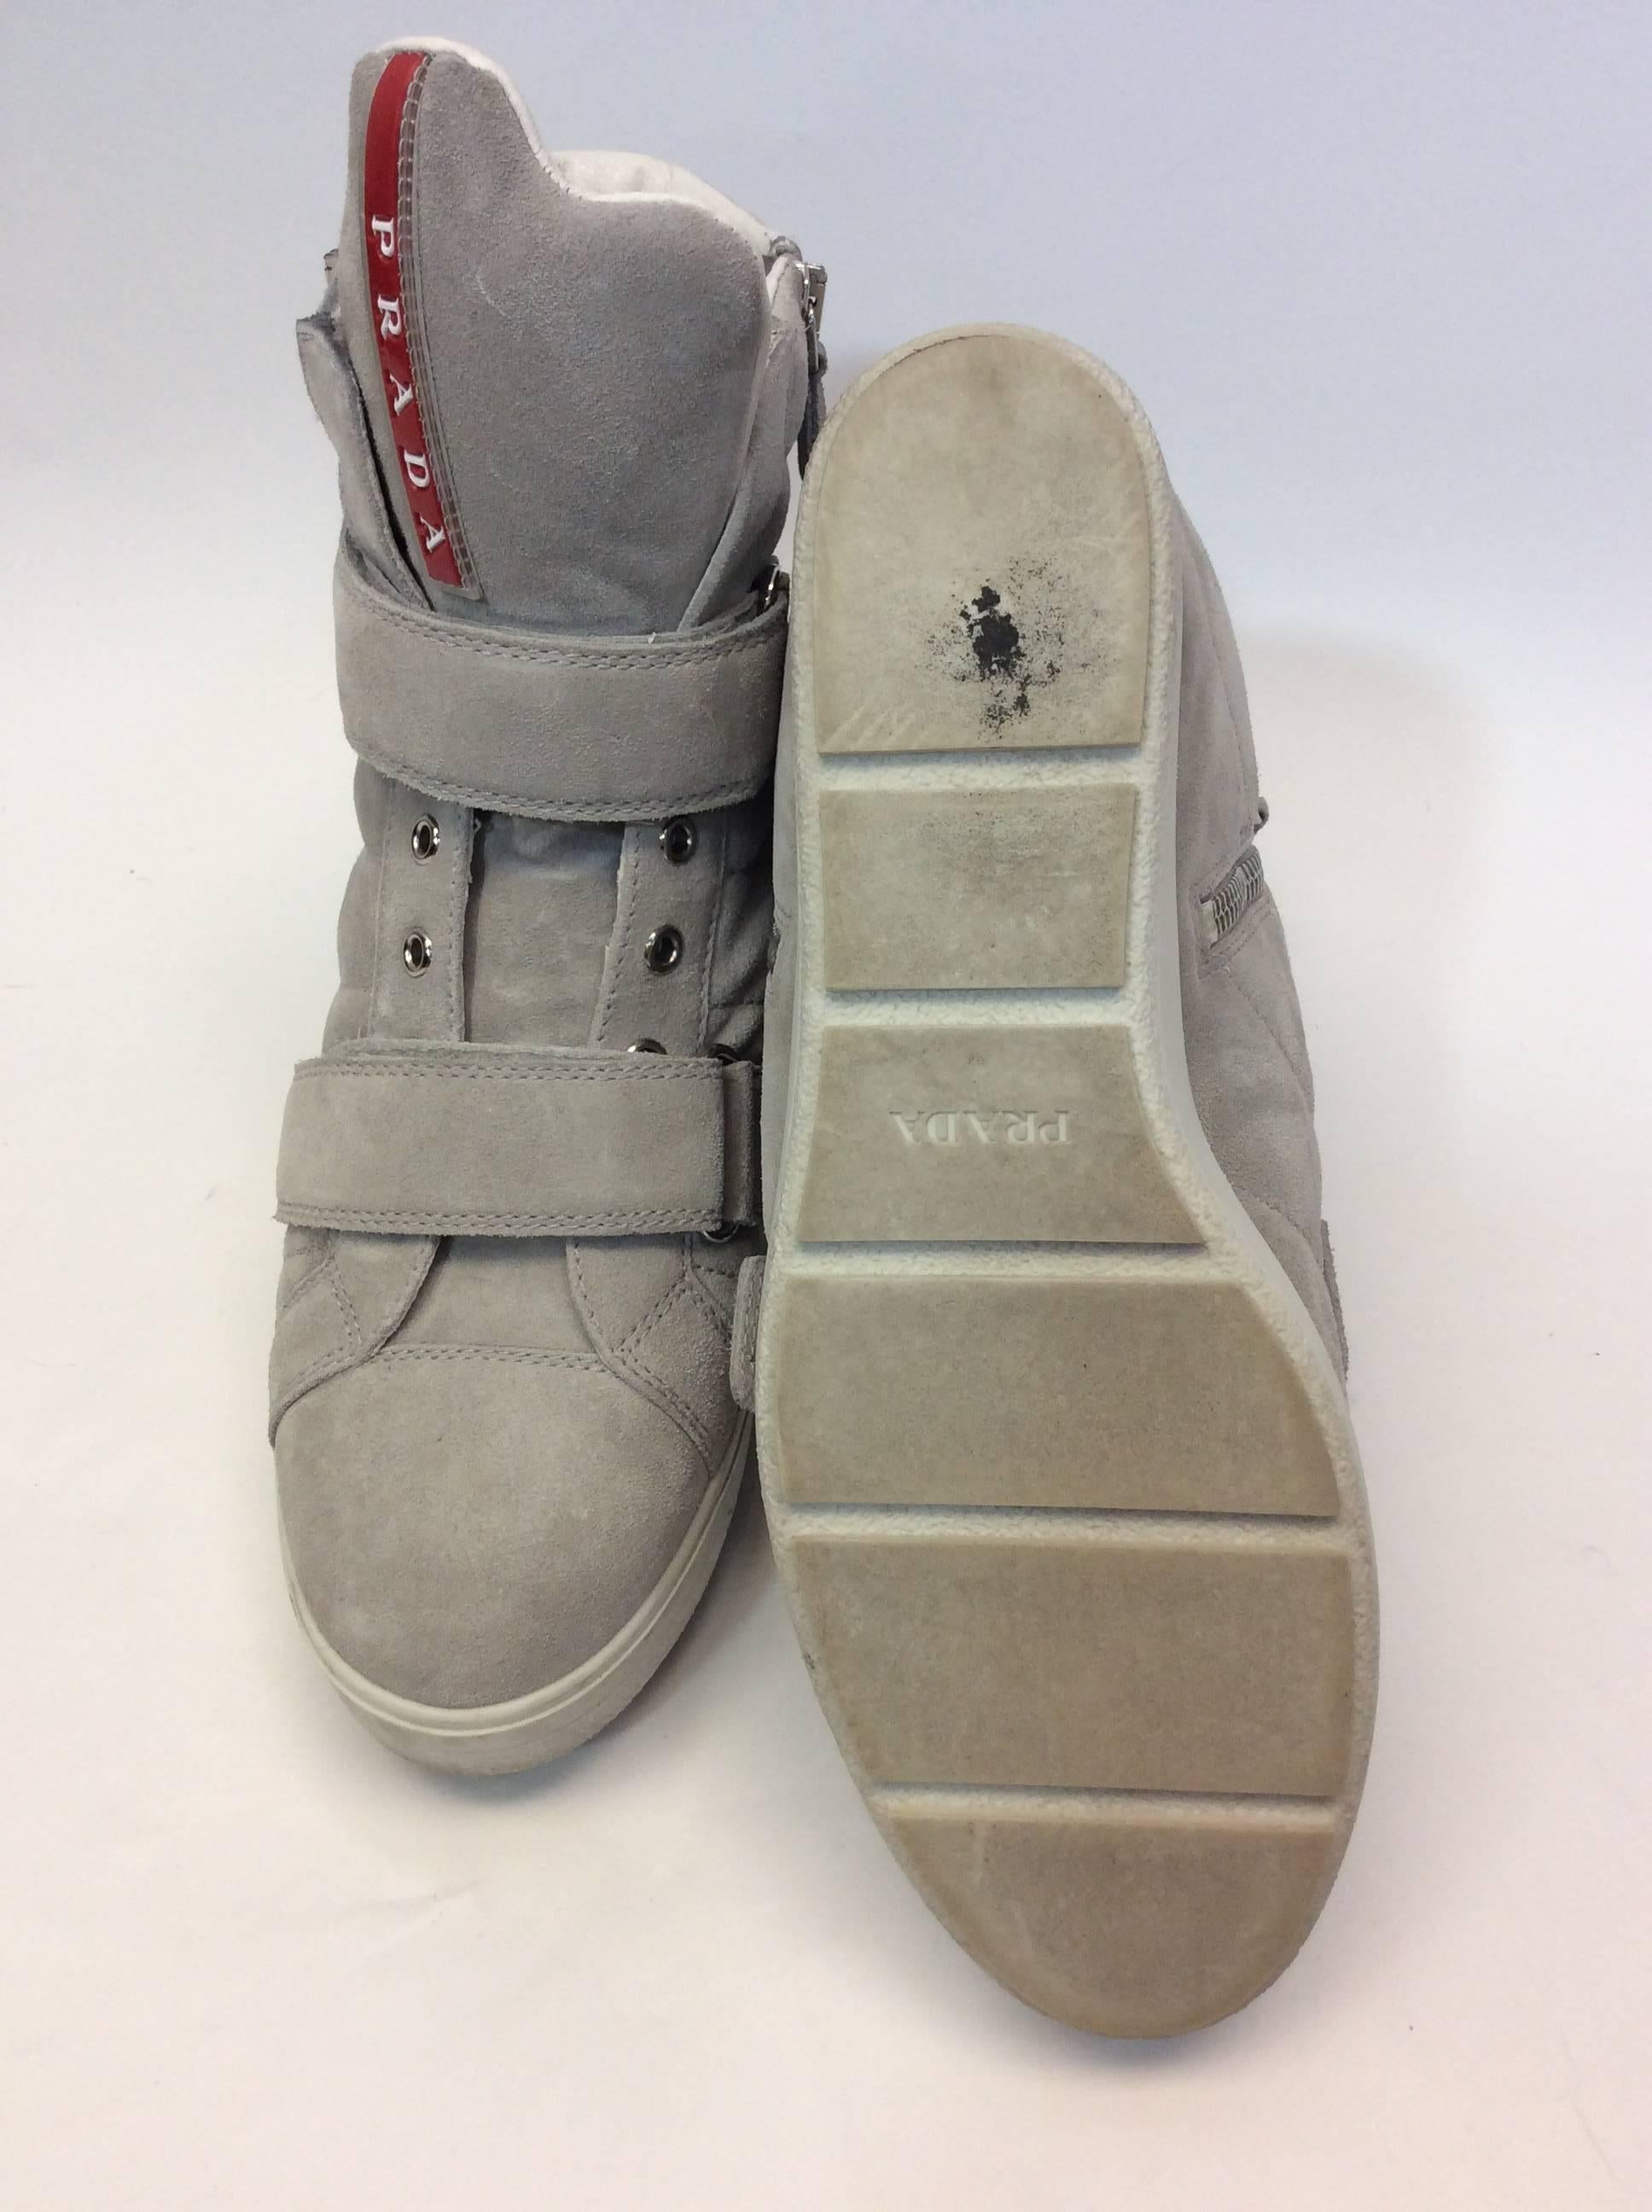 Grey Suede Zipped Platform Sneakers
1.5 inch platform
3.5 inch sole width
Zipper closure on inner and outer ankle
Two velcro straps
Space for laces, but not included with shoe
Size 38.5
Rubber sole, suede upper, leather lining